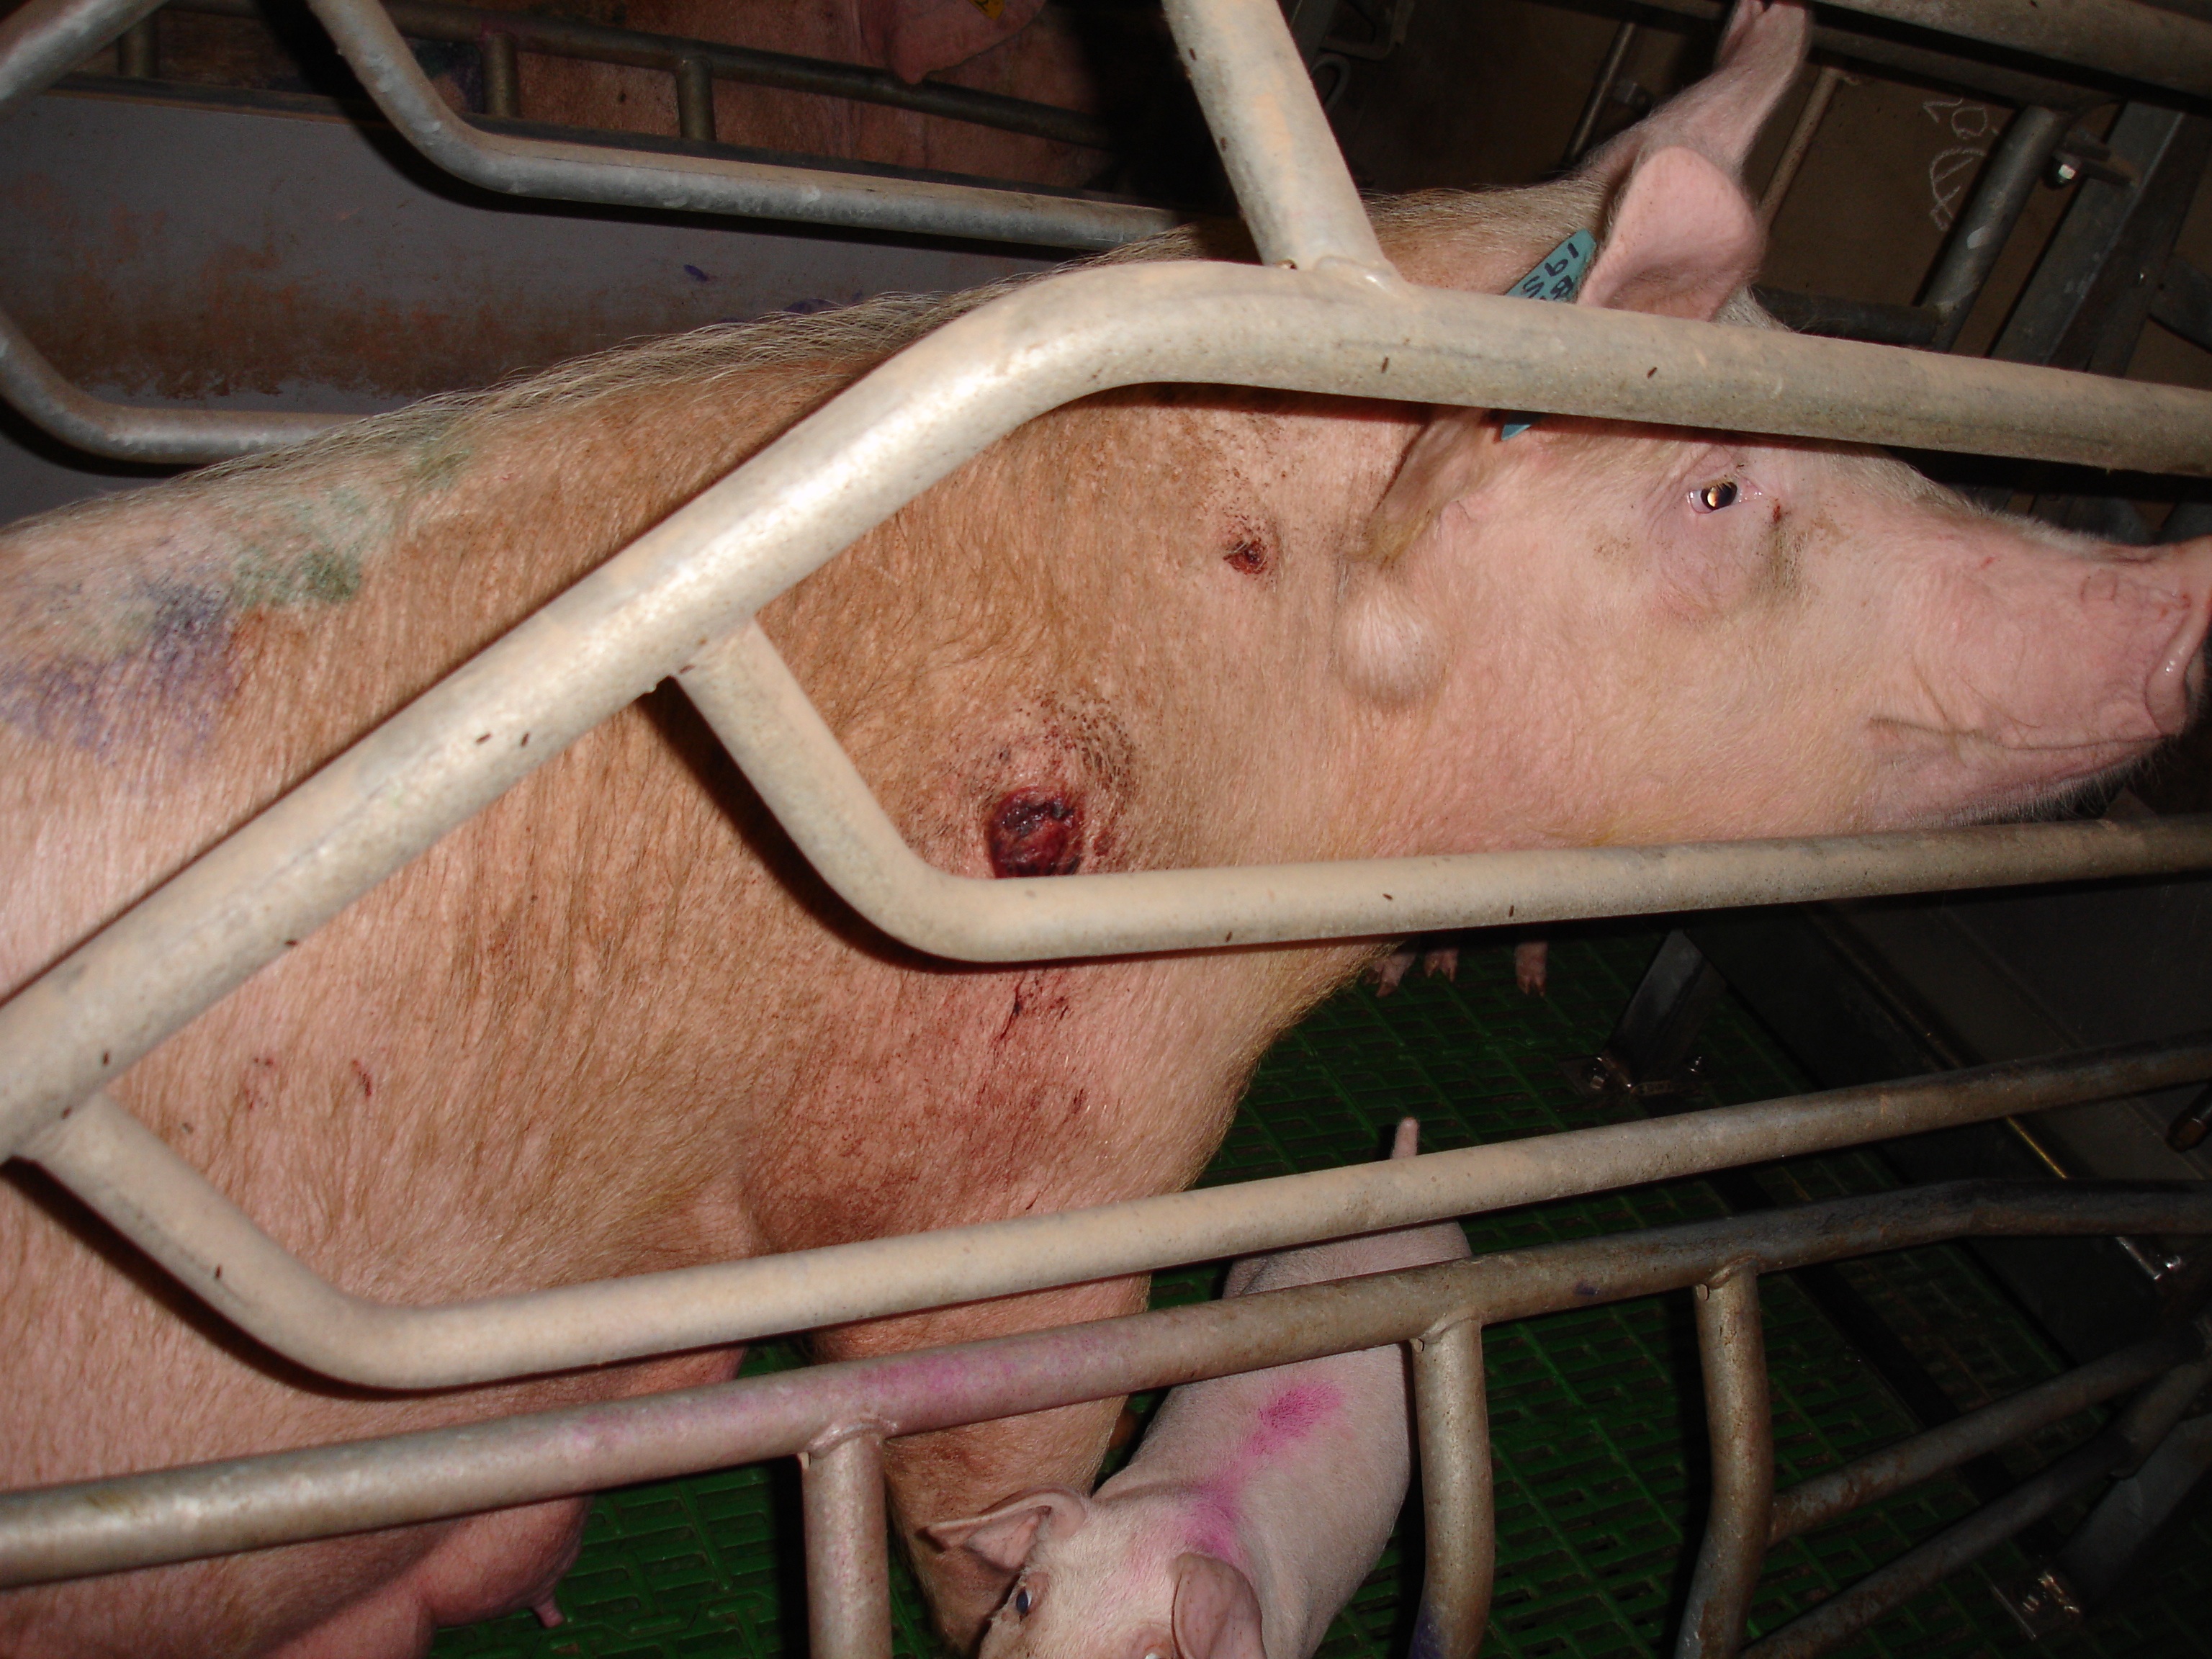 Pigs reared on intensive farms